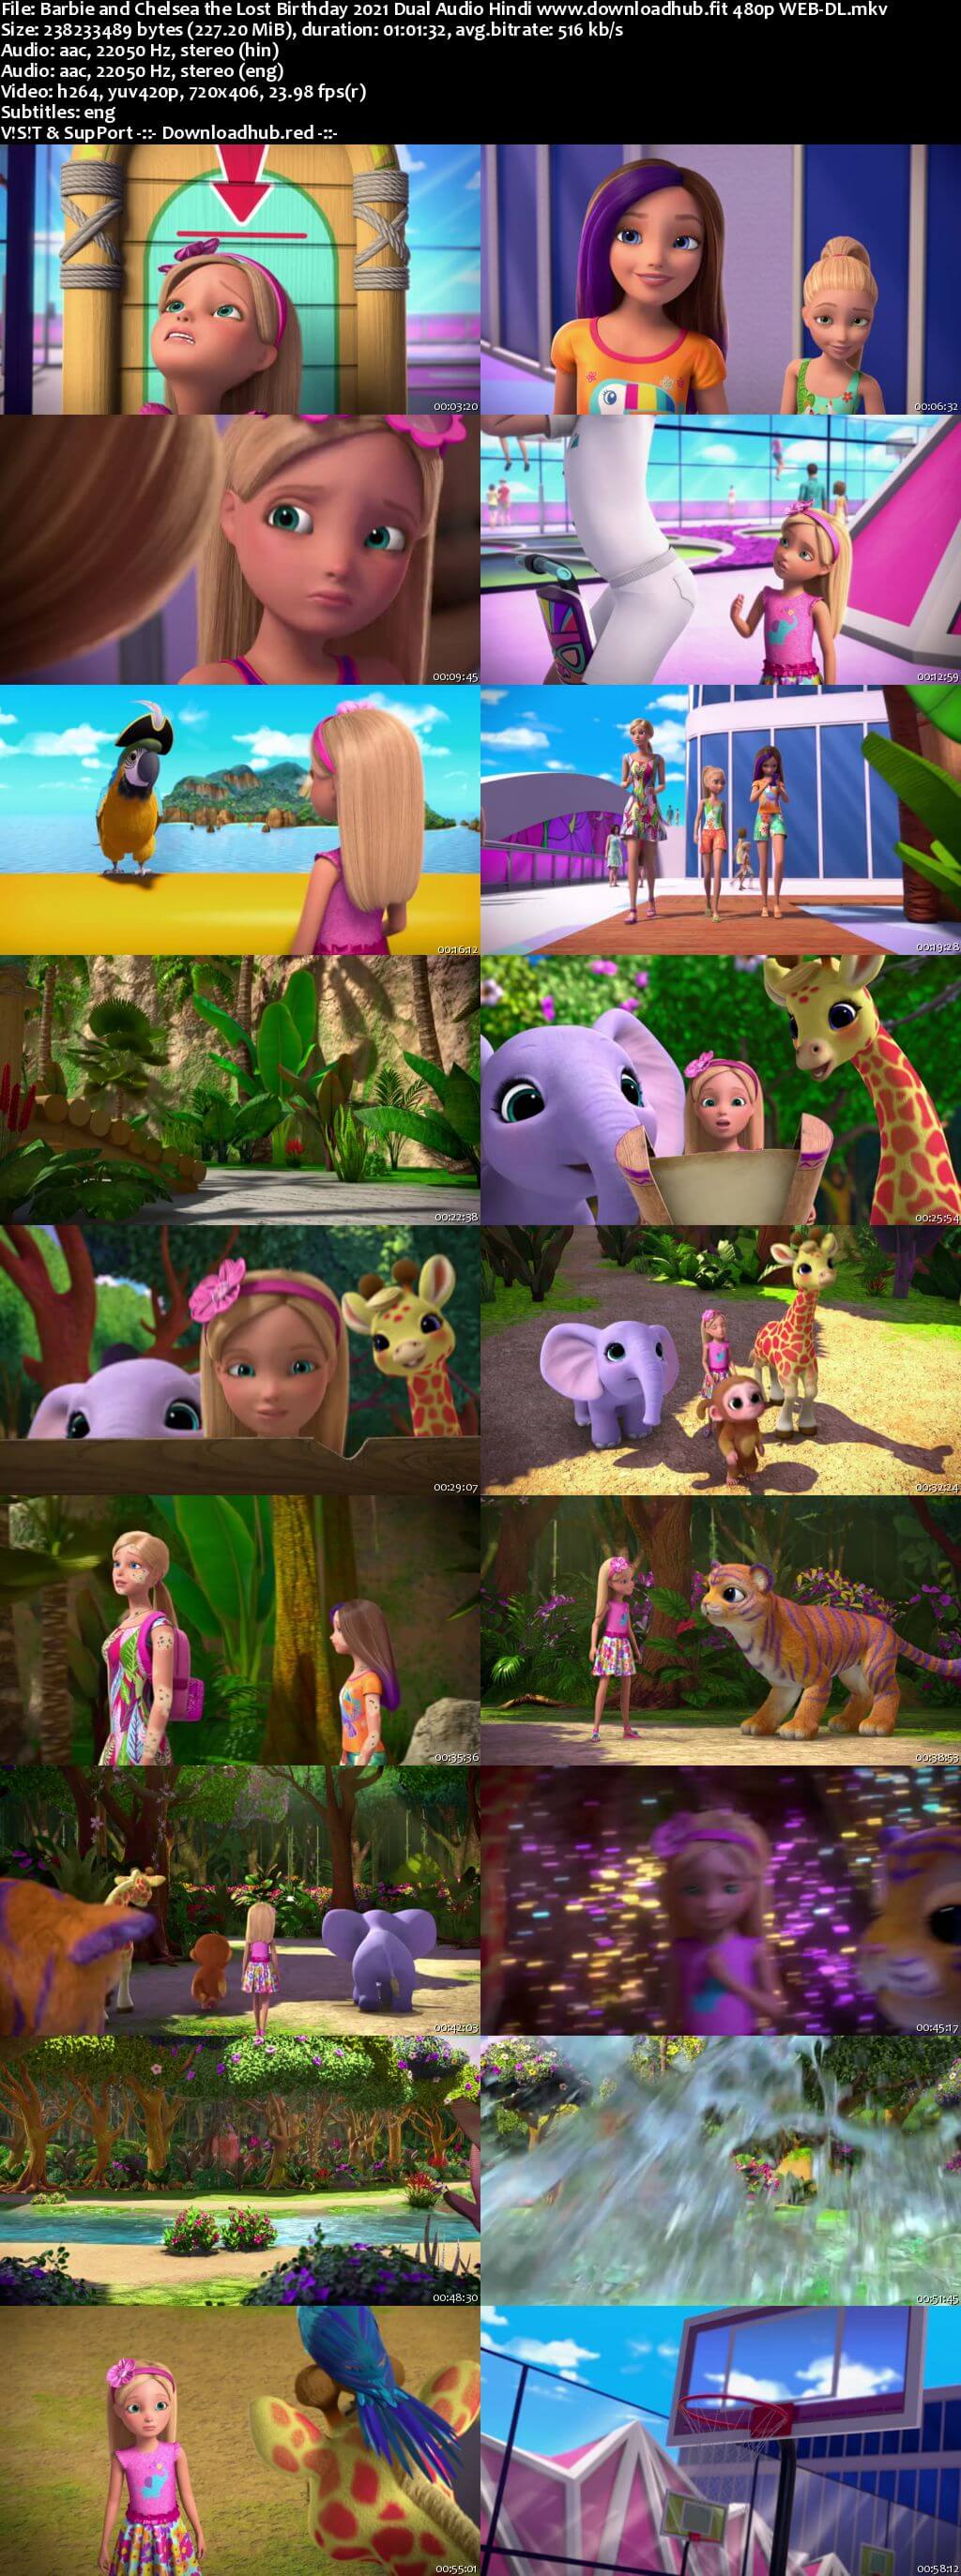 Barbie And Chelsea the Lost Birthday 2021 Hindi Dual Audio 200MB Web-DL 480p ESubs